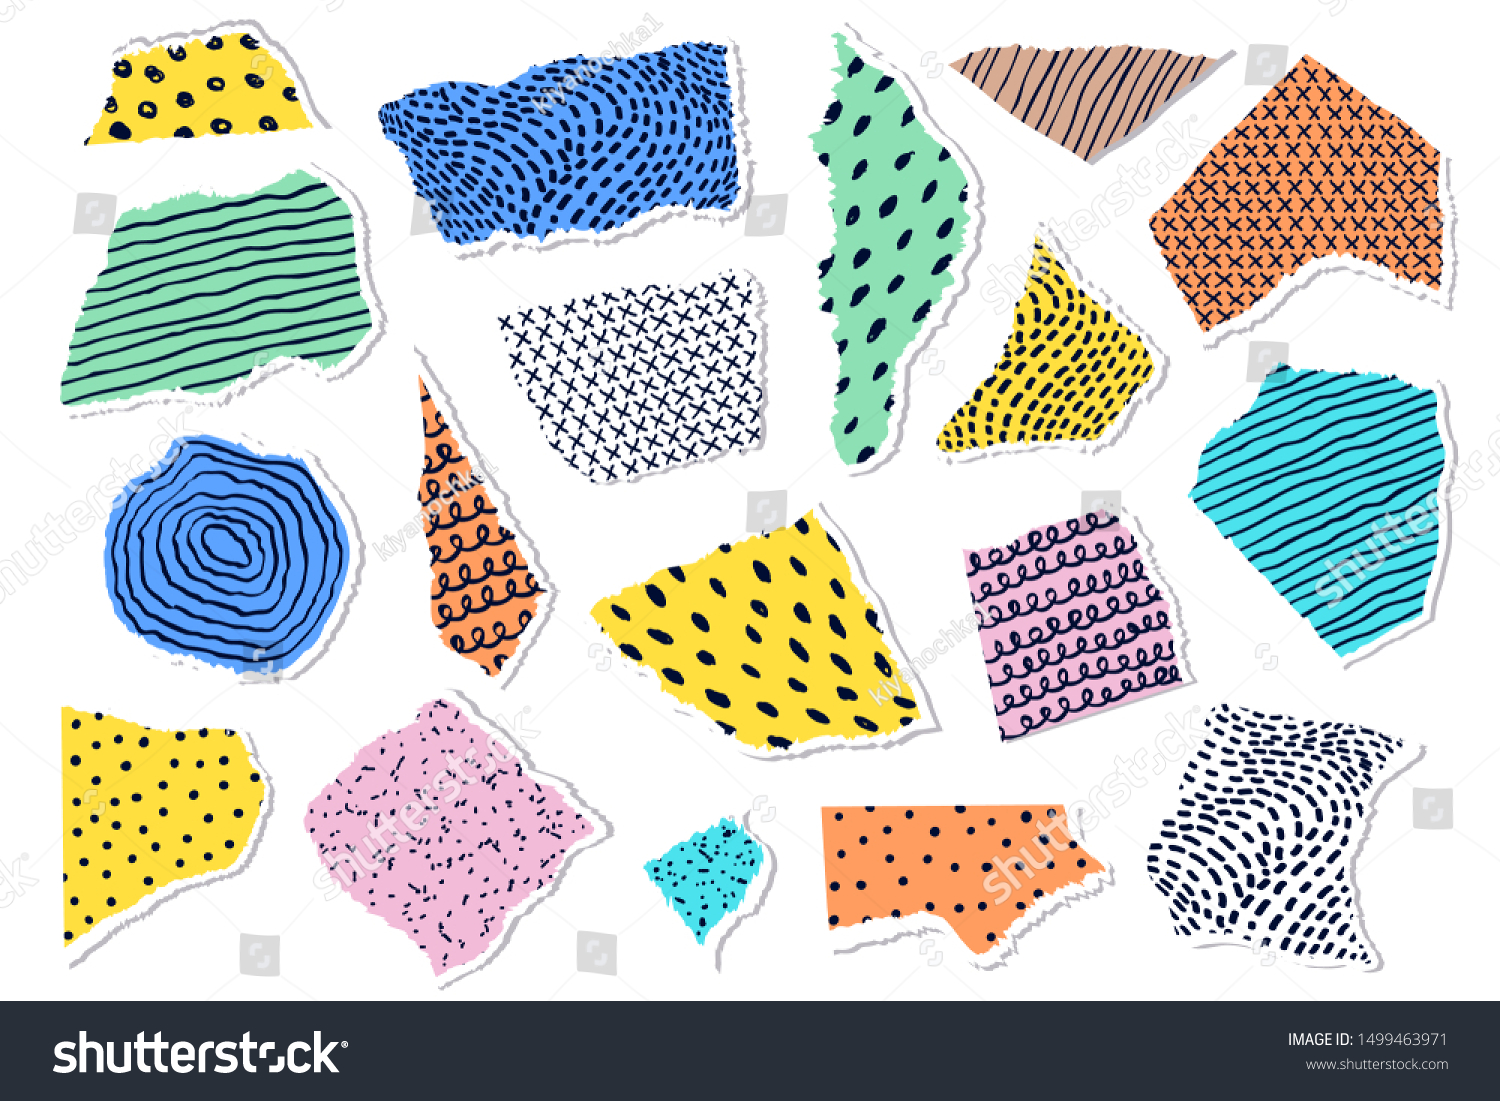 Collection Colorful Paper Piecies On White Stock Vector Royalty Free 1499463971,Indian Blanket Designs